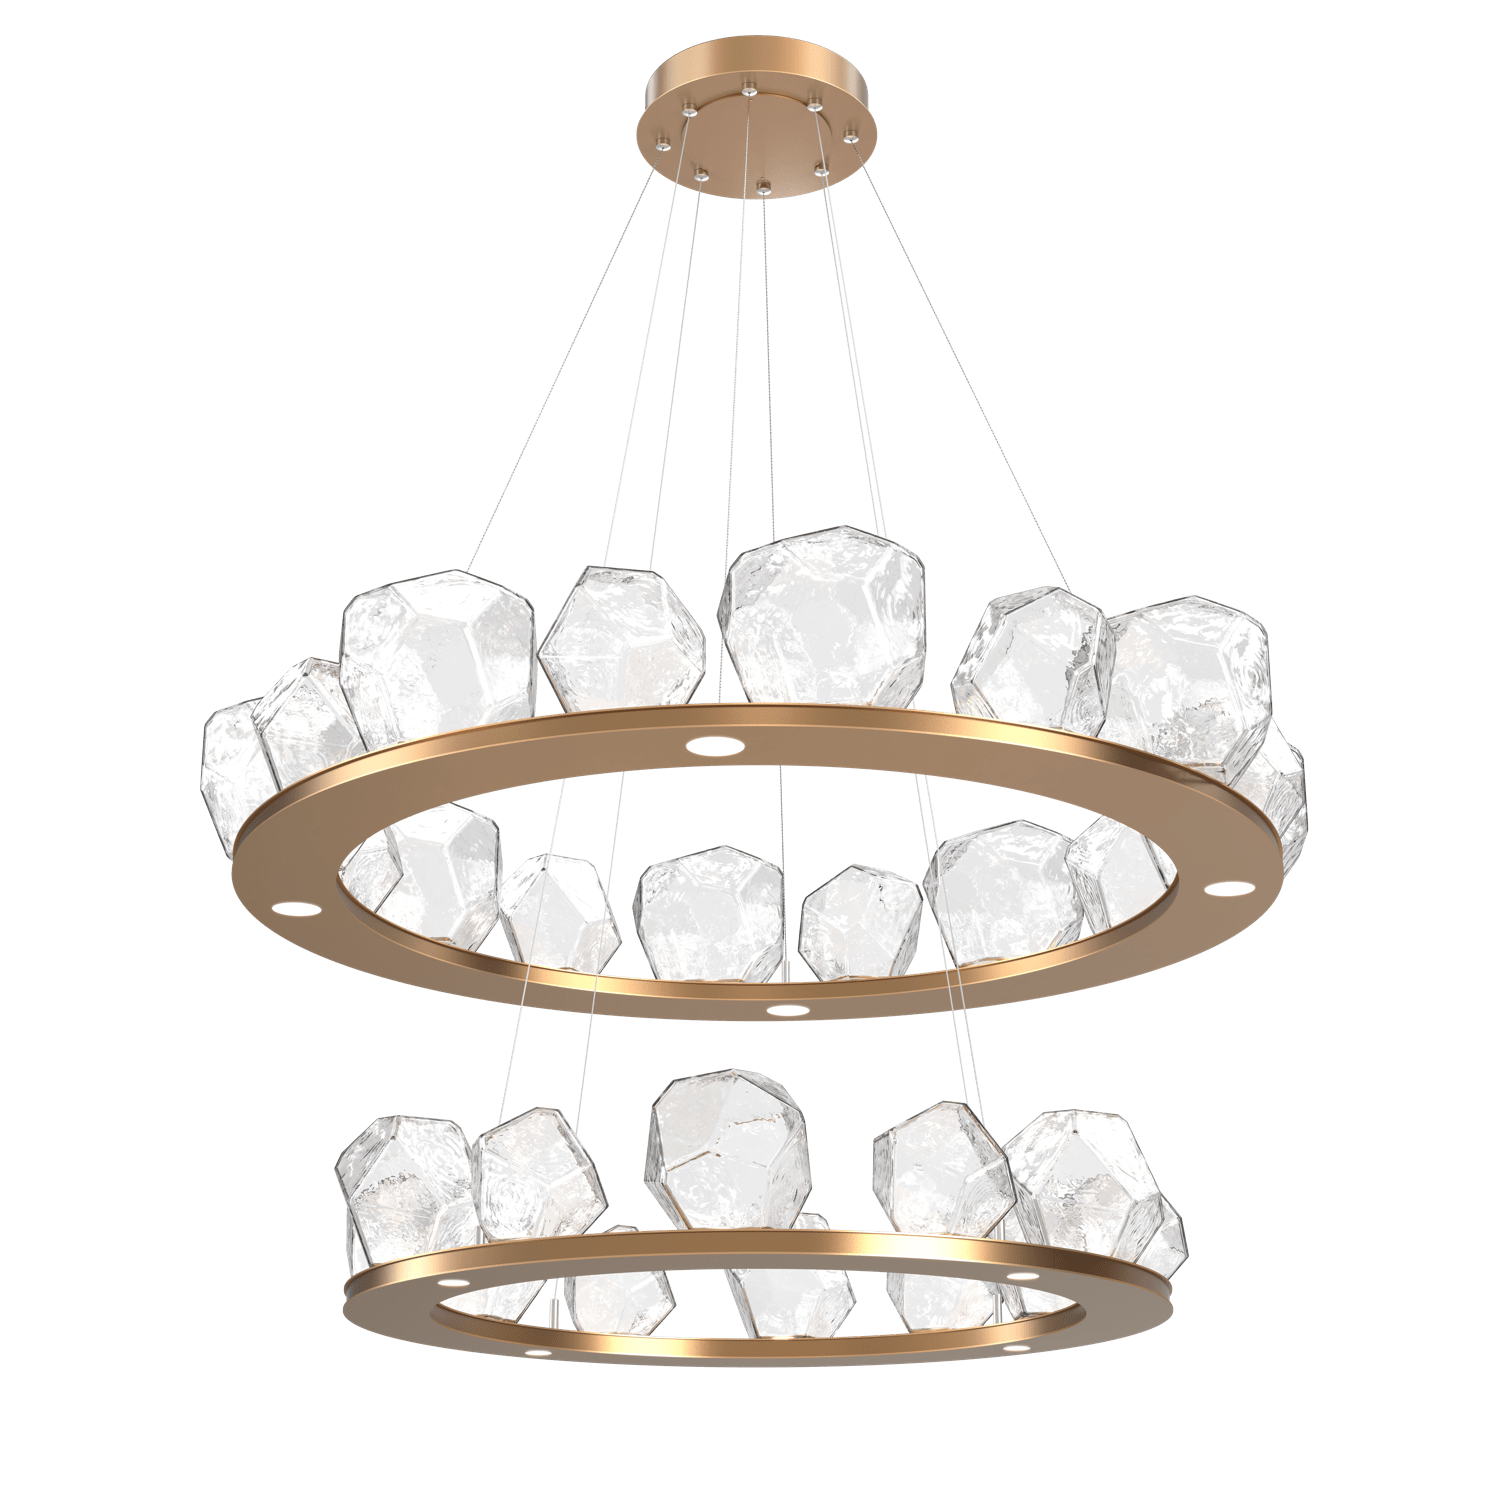 CHB0039-2B-NB-C-Hammerton-Studio-Gem-48-inch-two-tier-ring-chandelier-with-novel-brass-finish-and-clear-blown-glass-shades-and-LED-lamping